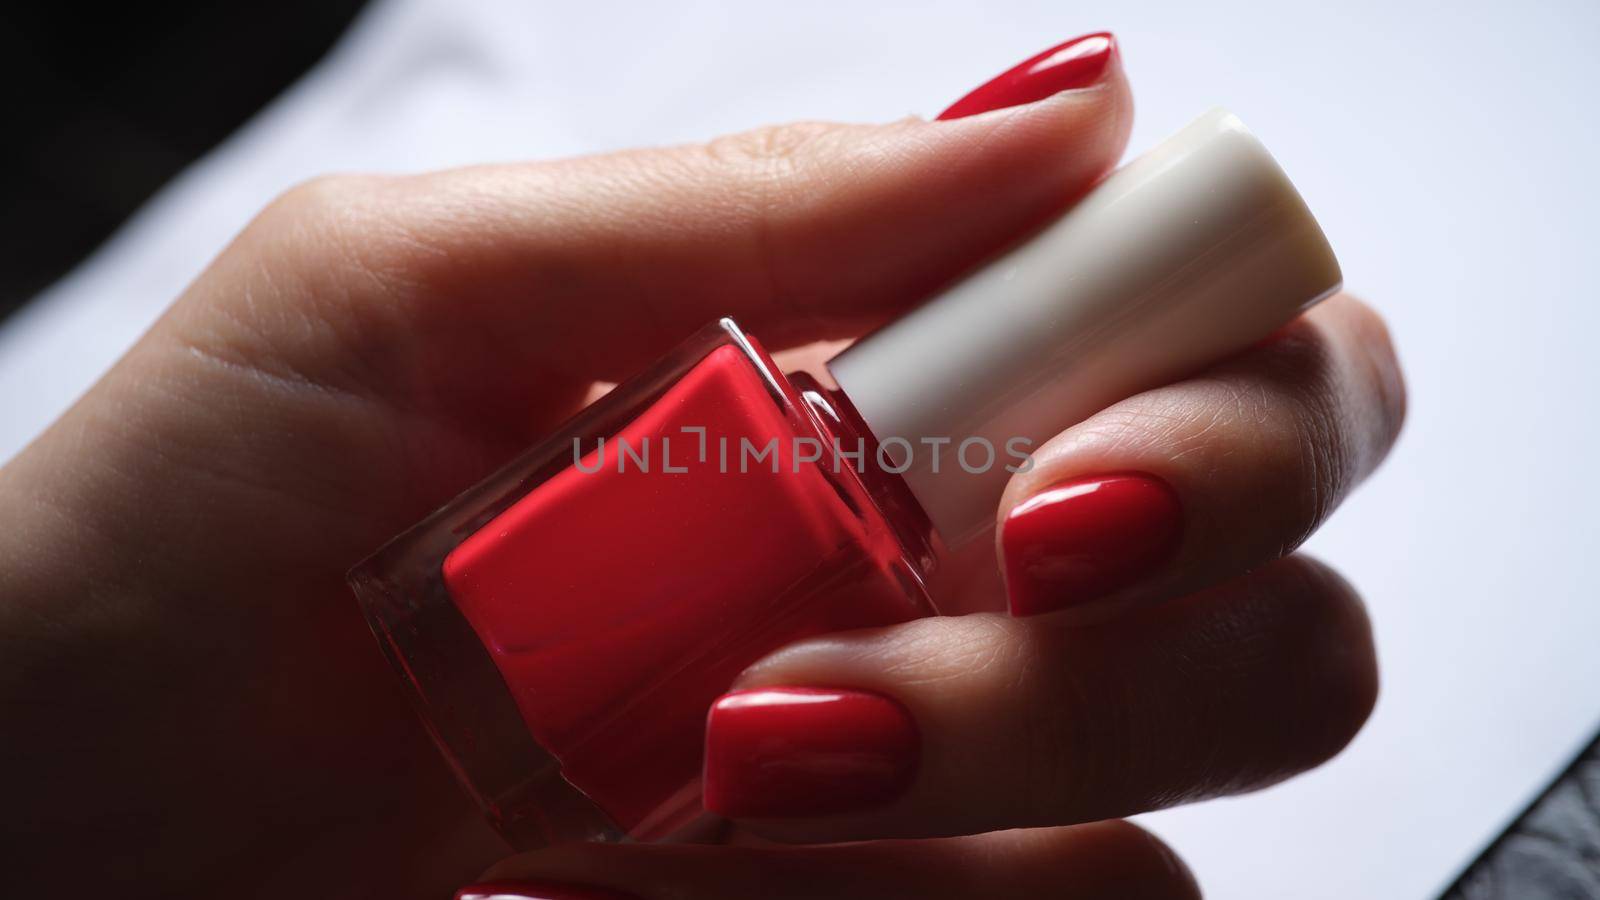 Stylish bright red lacquer on female nails. Fashionable red gel nail polish closeup